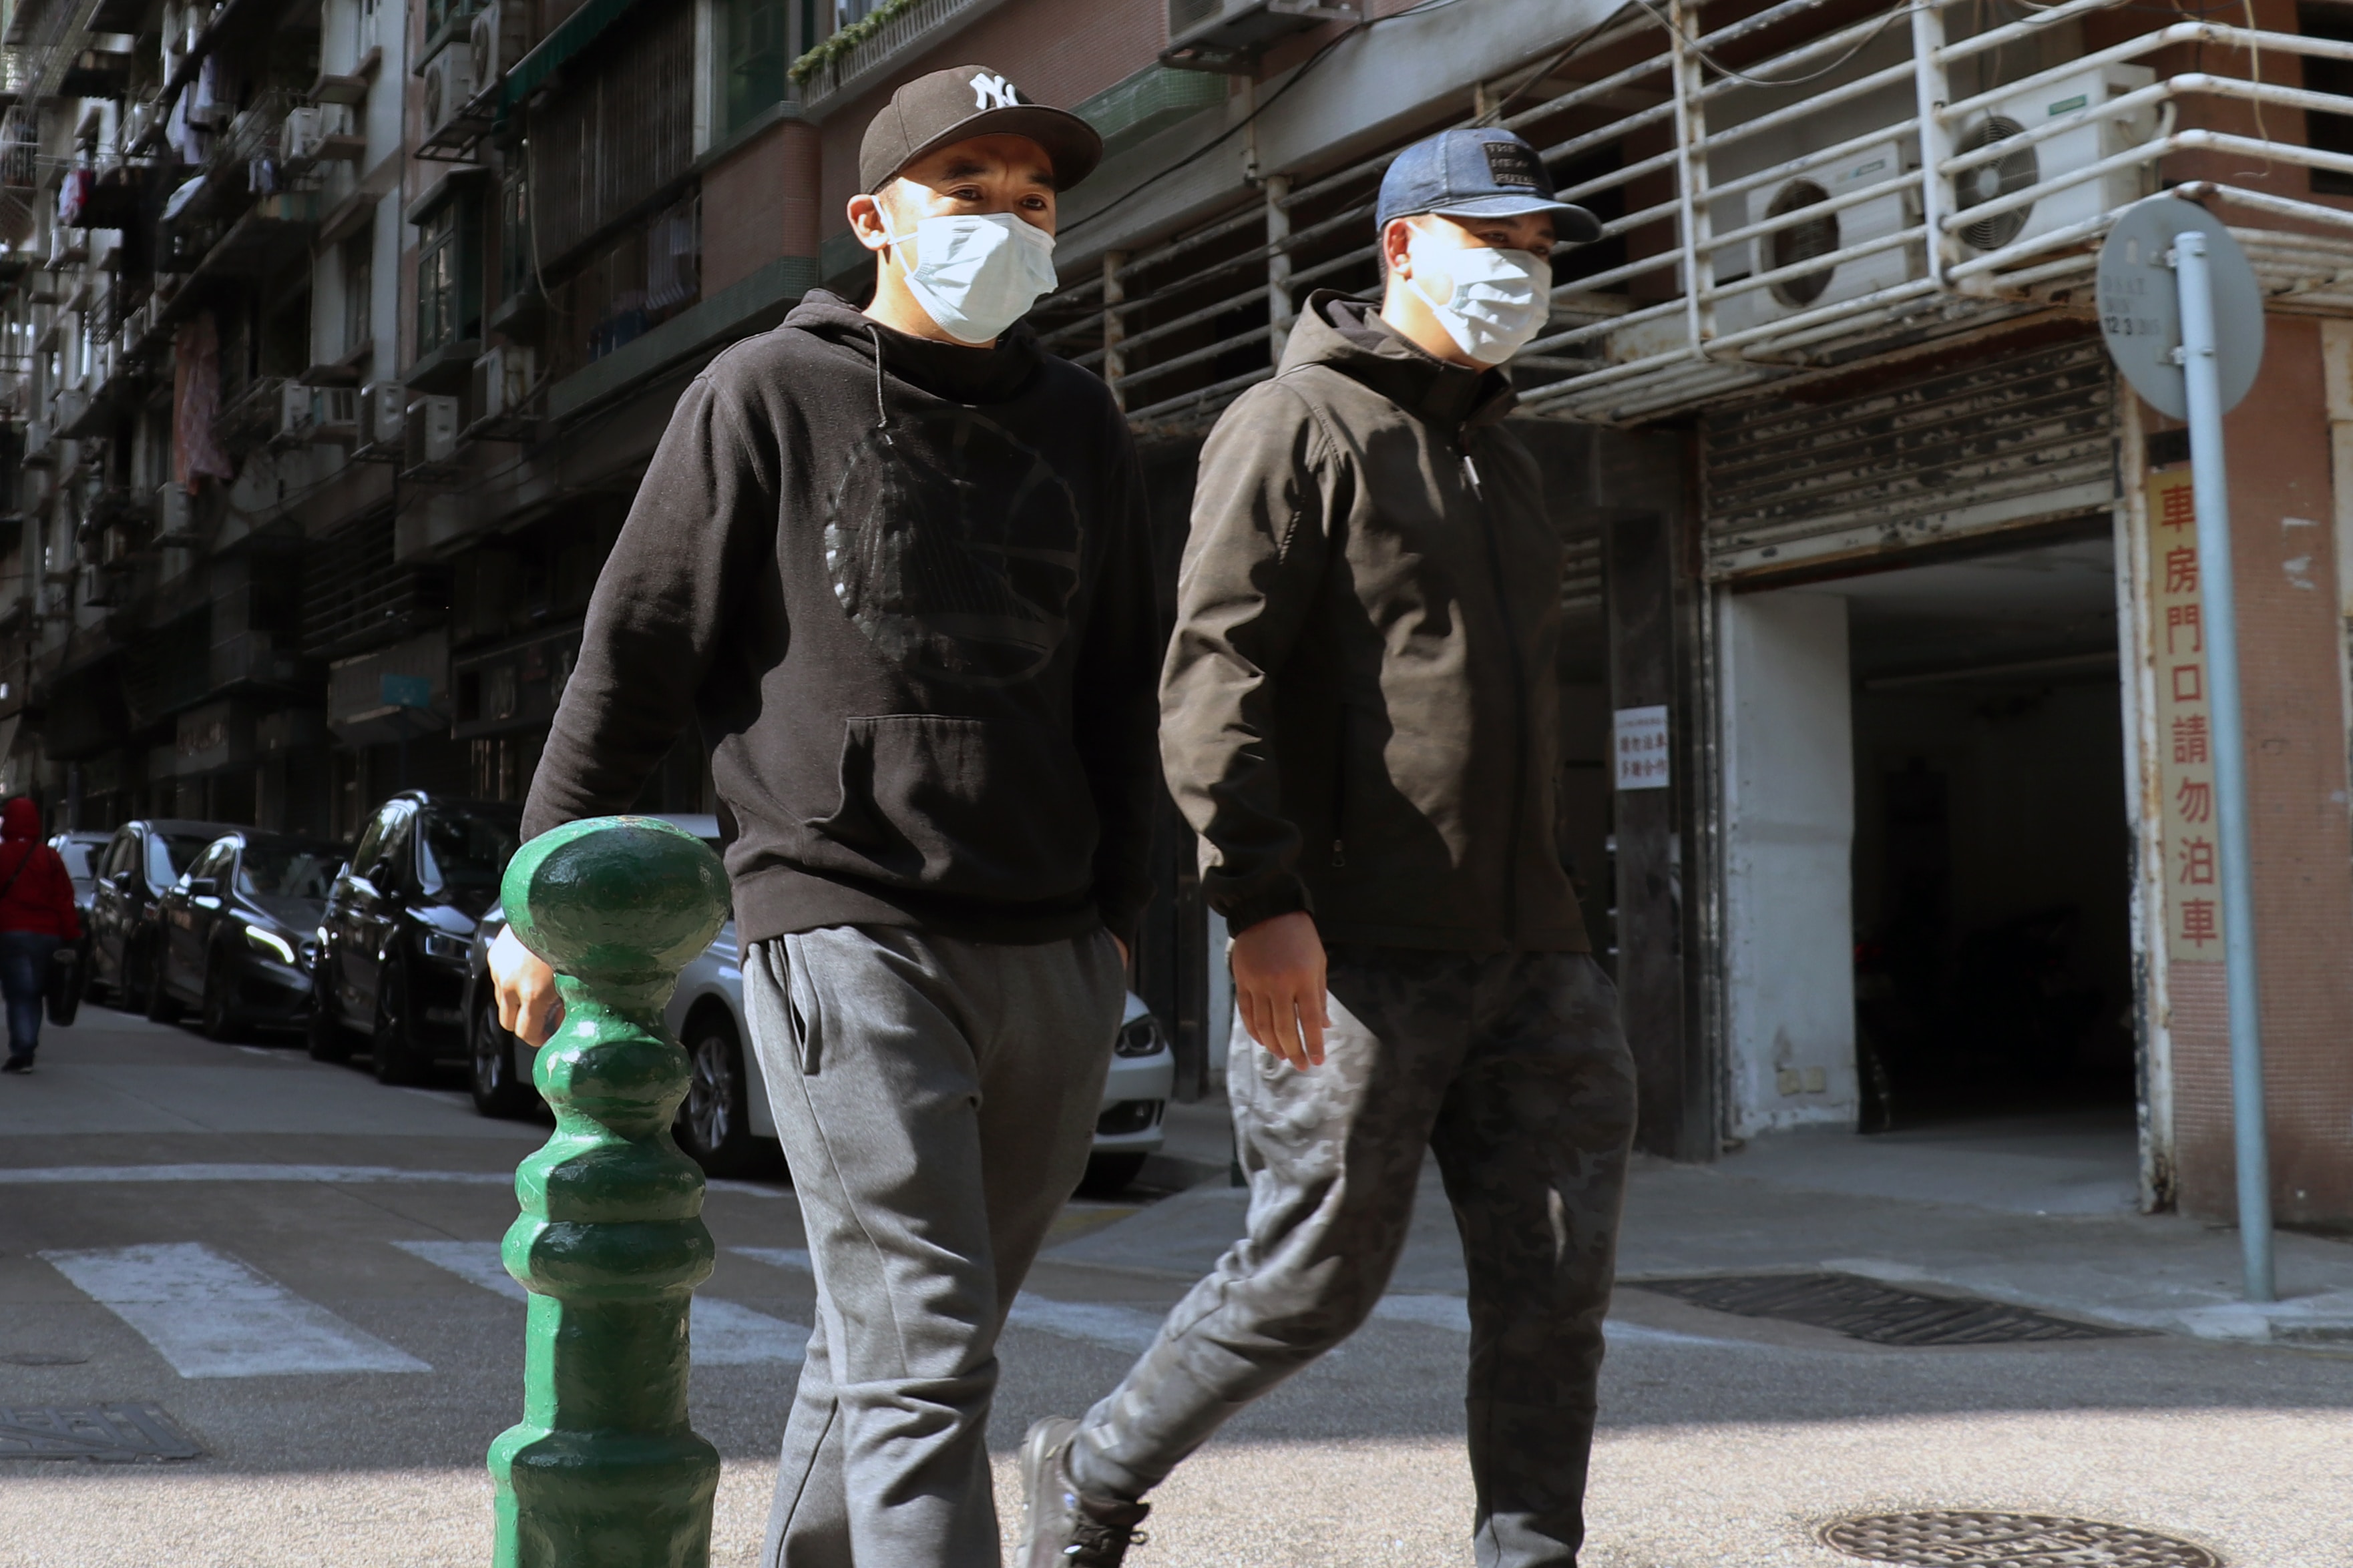 Life as a reporter trapped in Hubei, ground zero of the coronavirus outbreak